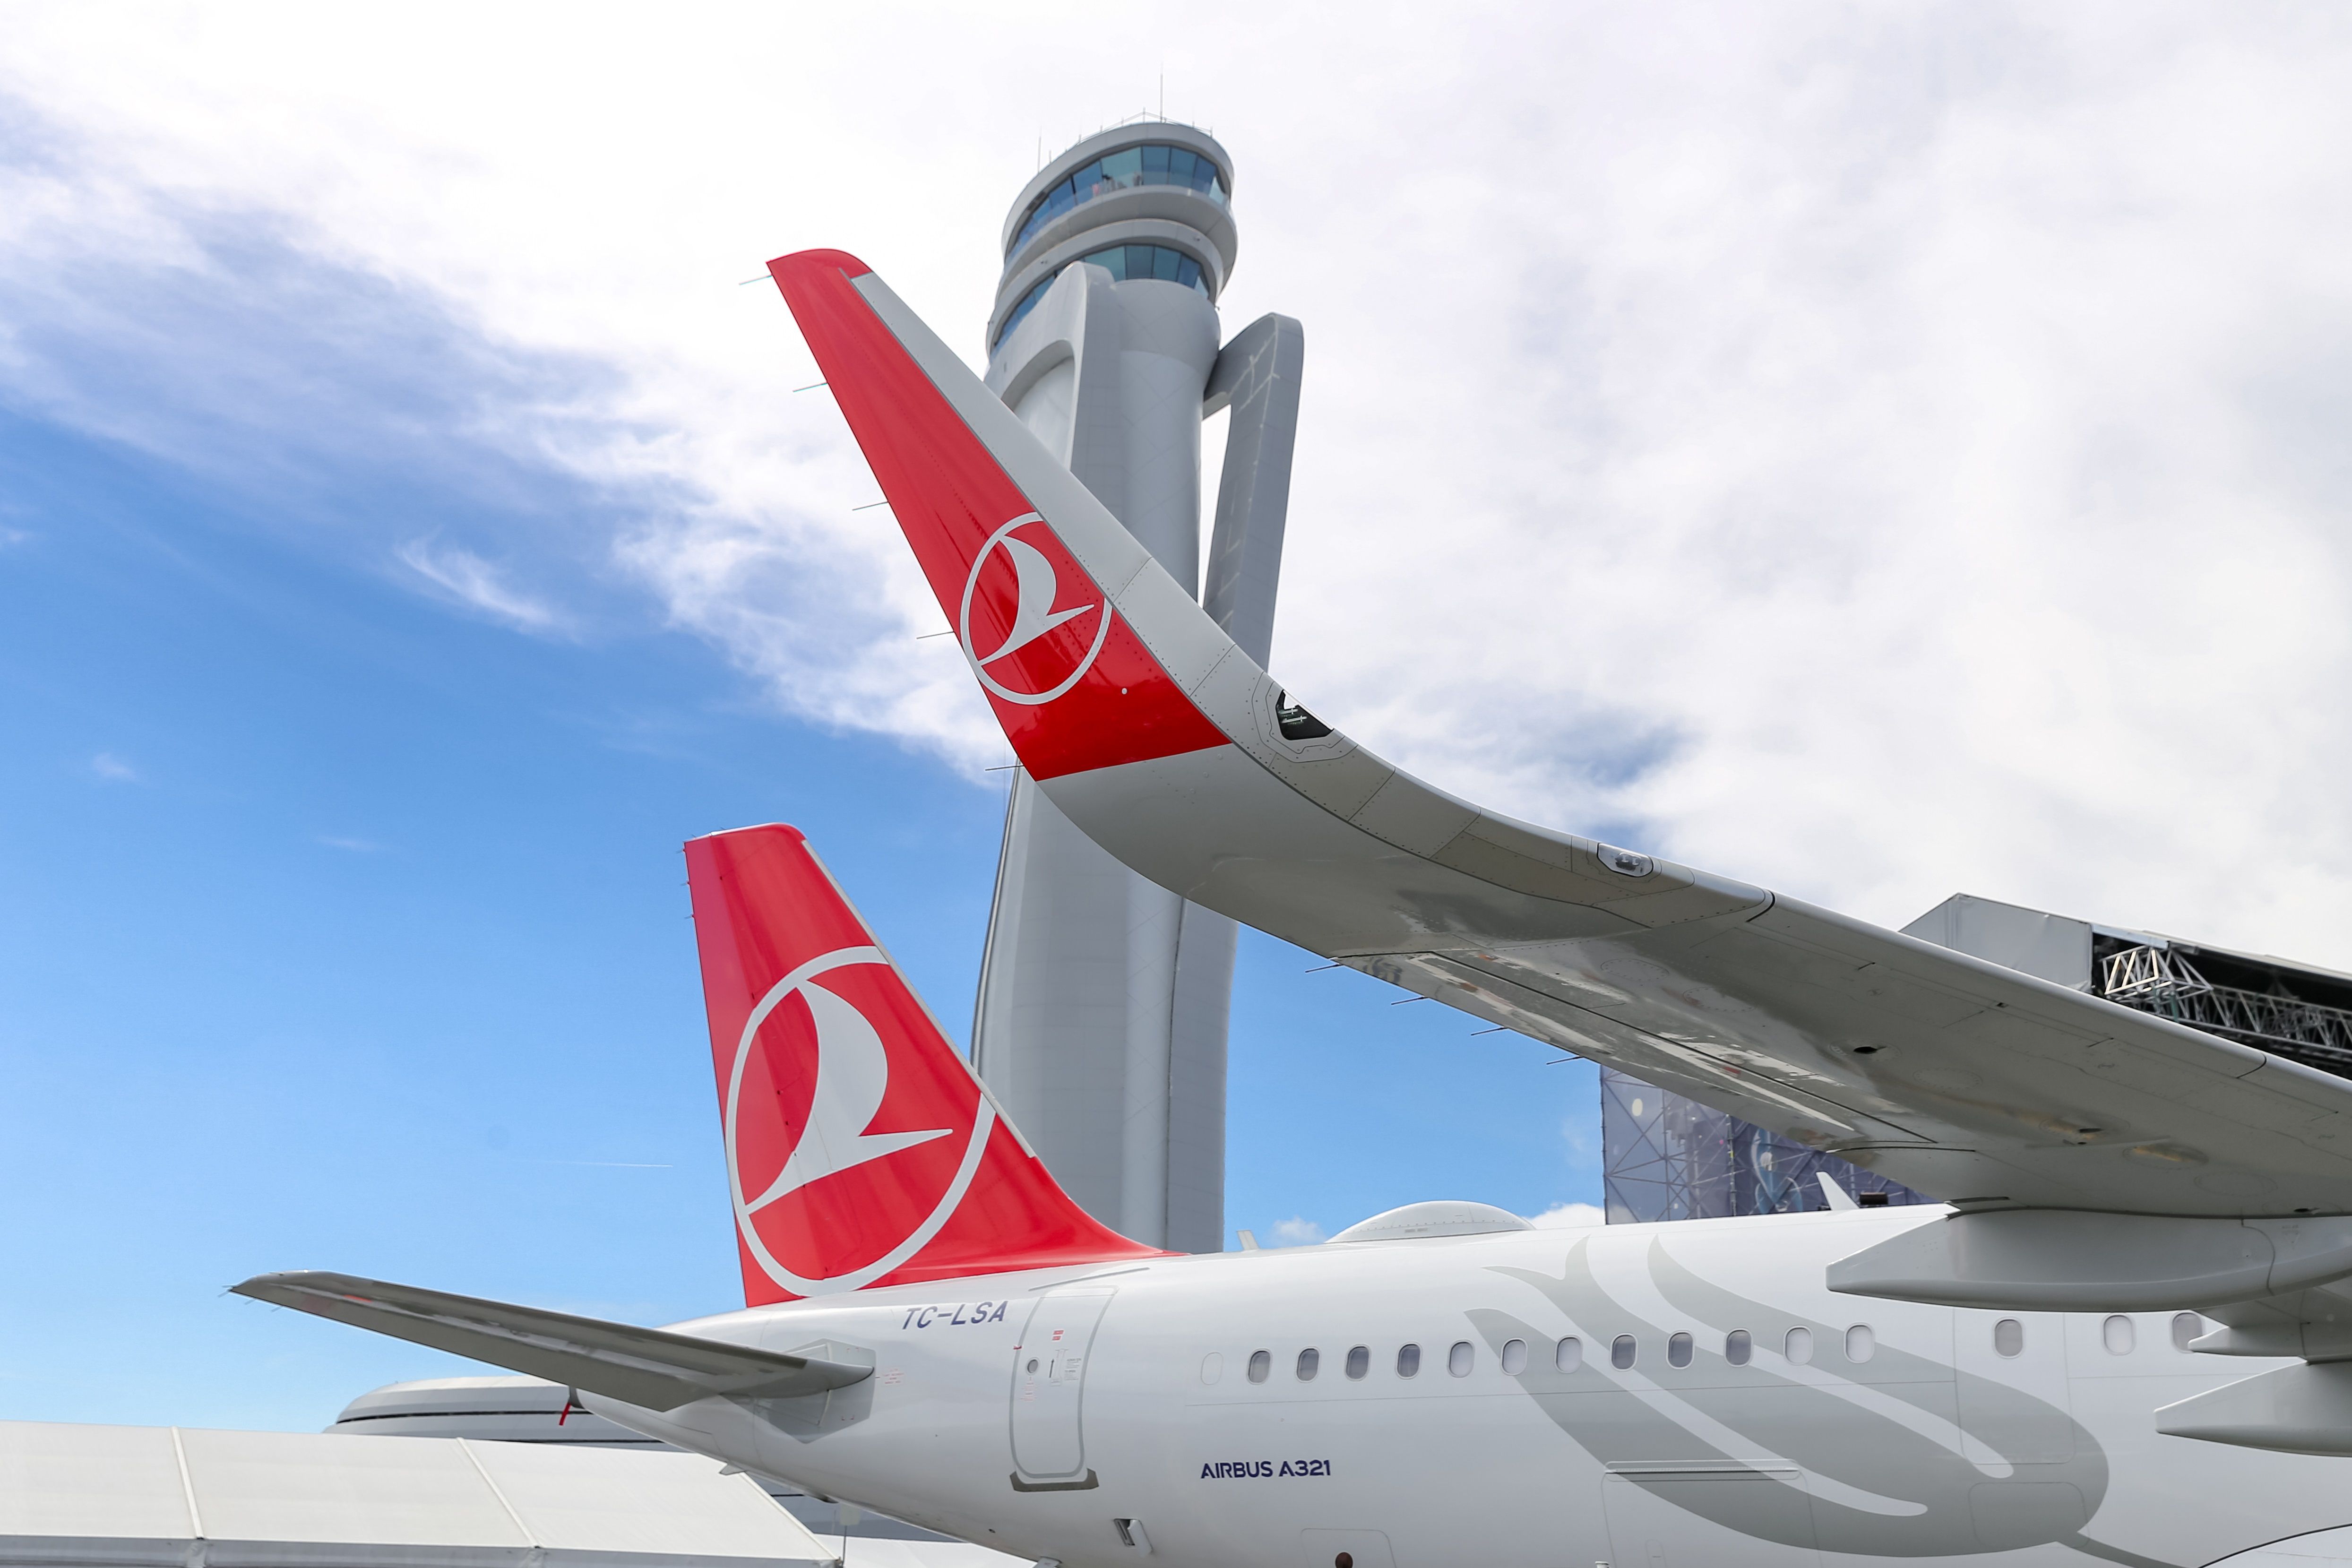 The tail of a Turkish Airlines aircraft on an airport apron.